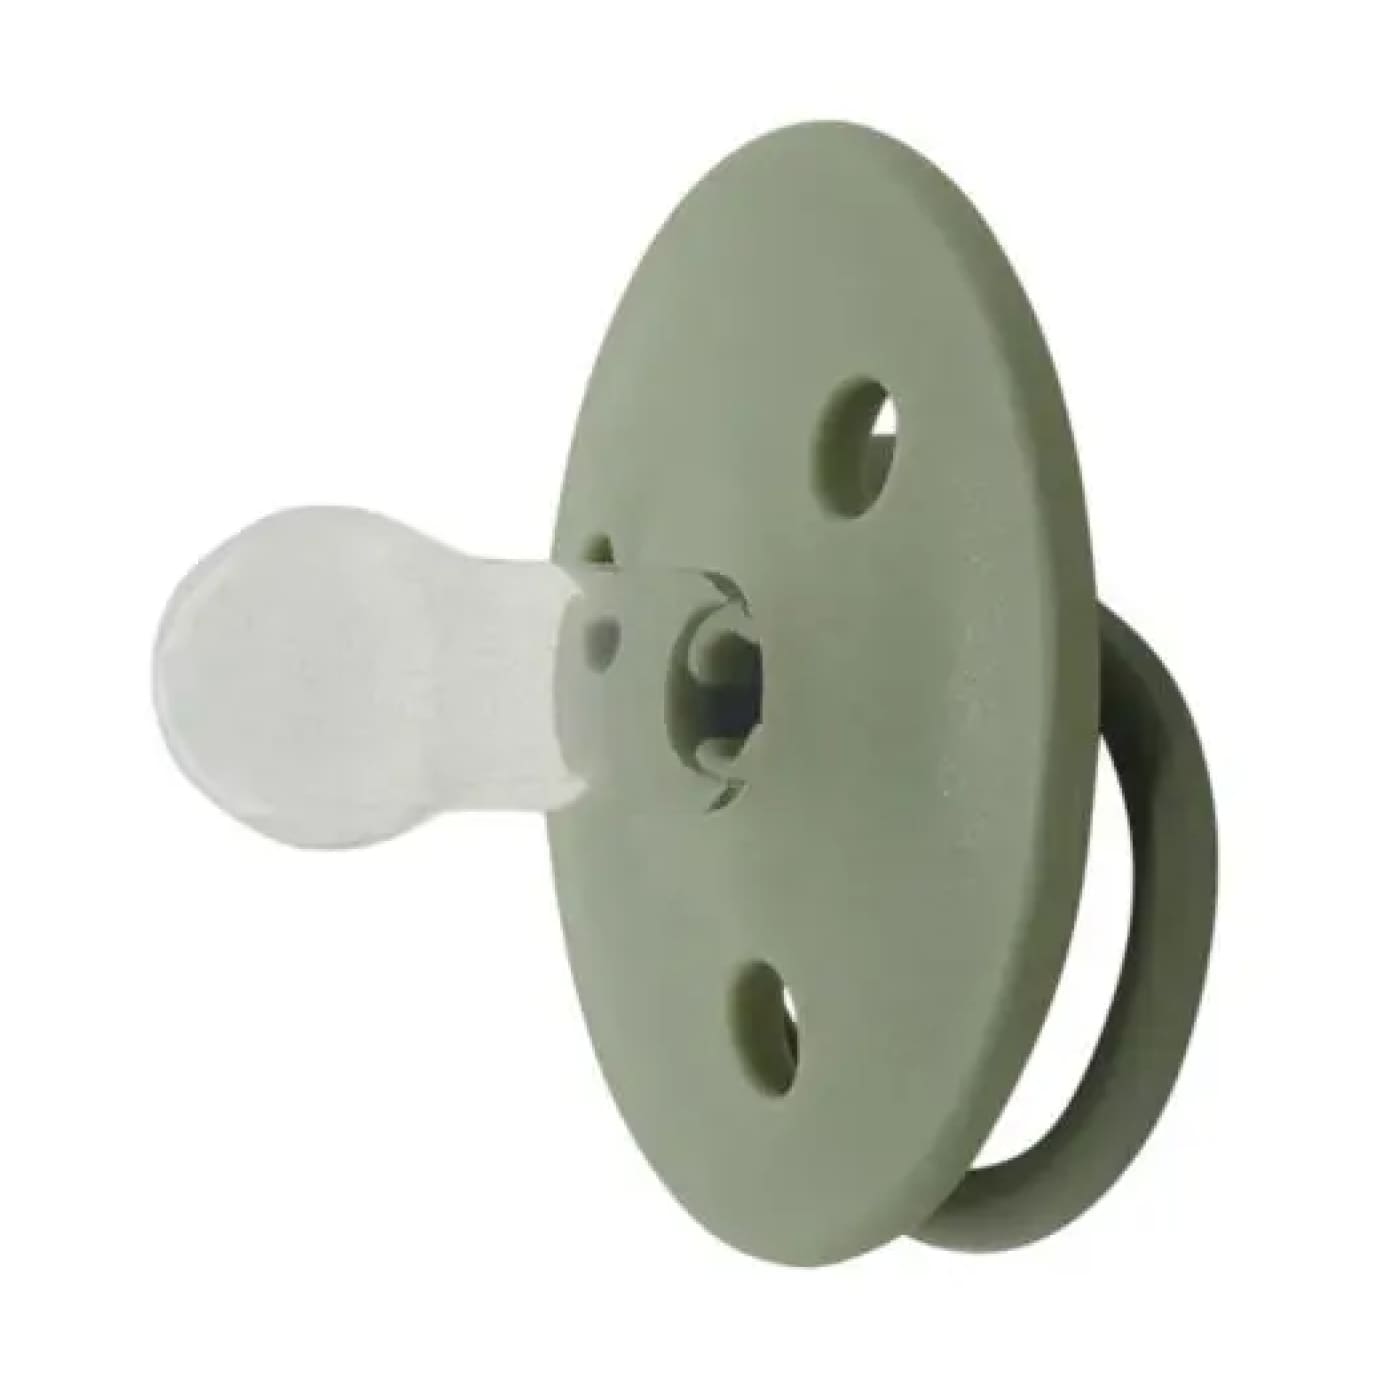 Mininor Silicone Pacifier/Dummy - Willow Green - NURSING & FEEDING - DUMMIES/SOOTHERS